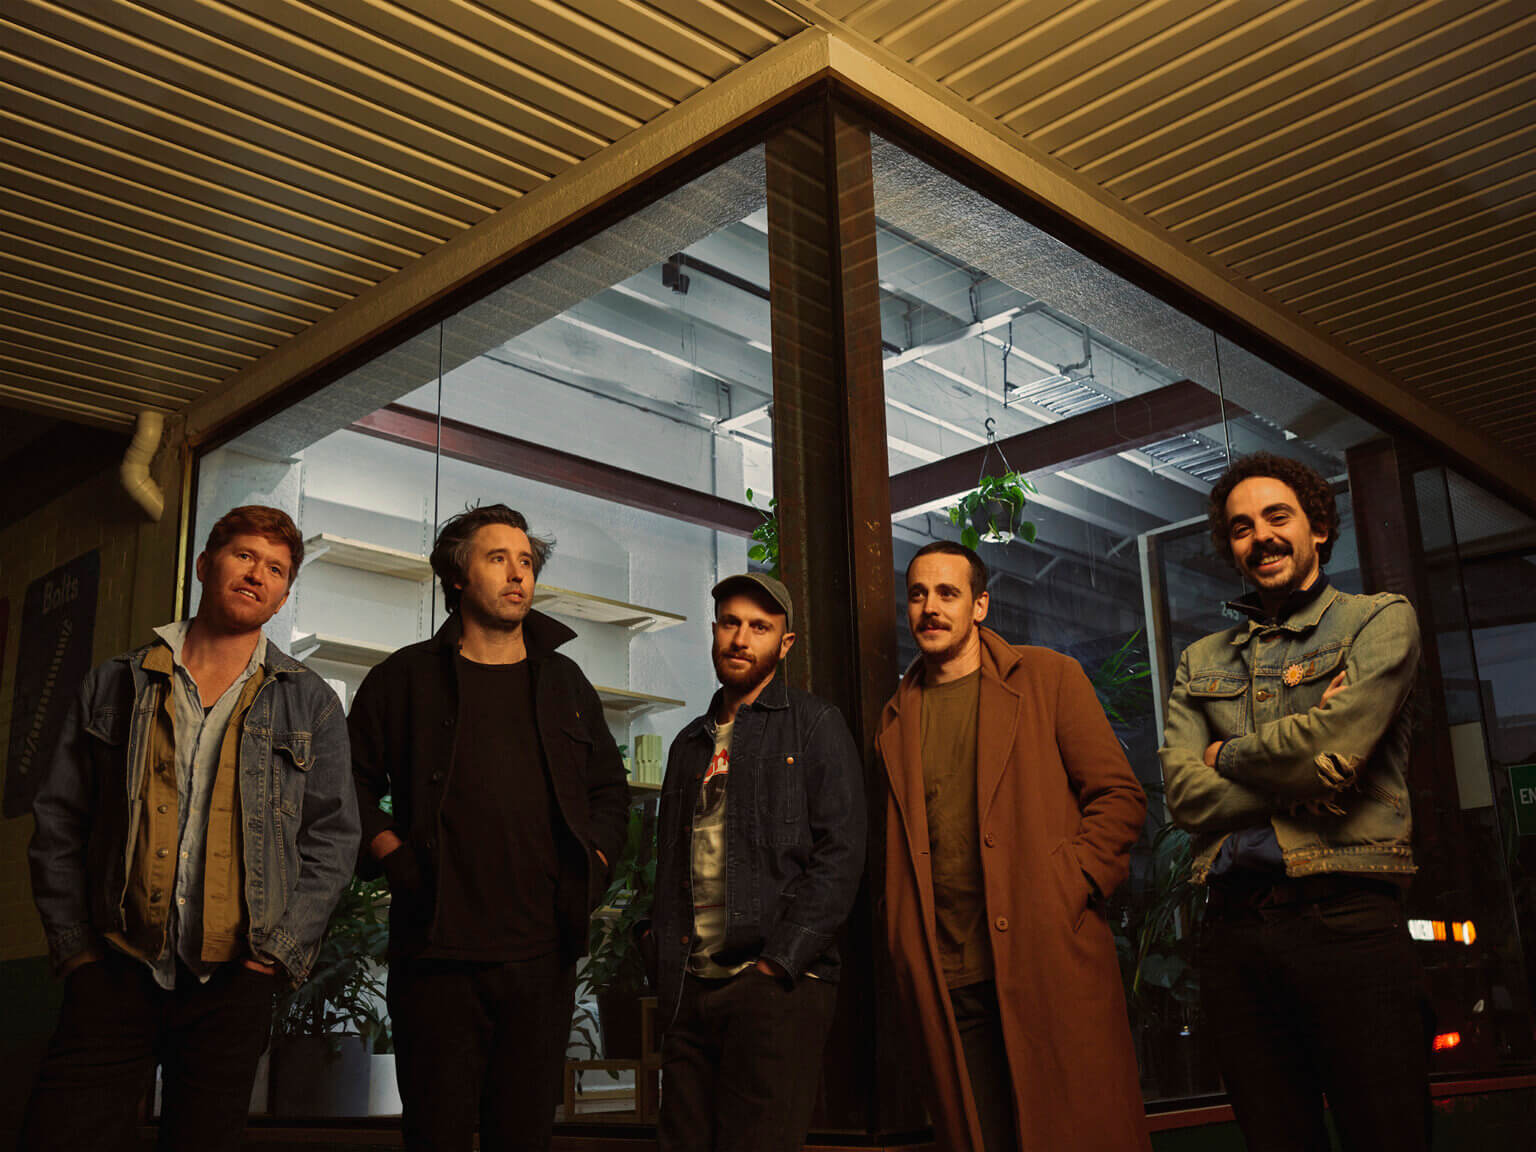 Rolling Blackouts Coastal Fever have shared a video for “The Only One” off their current release Sideways To New Italy, out now via Sub Pop